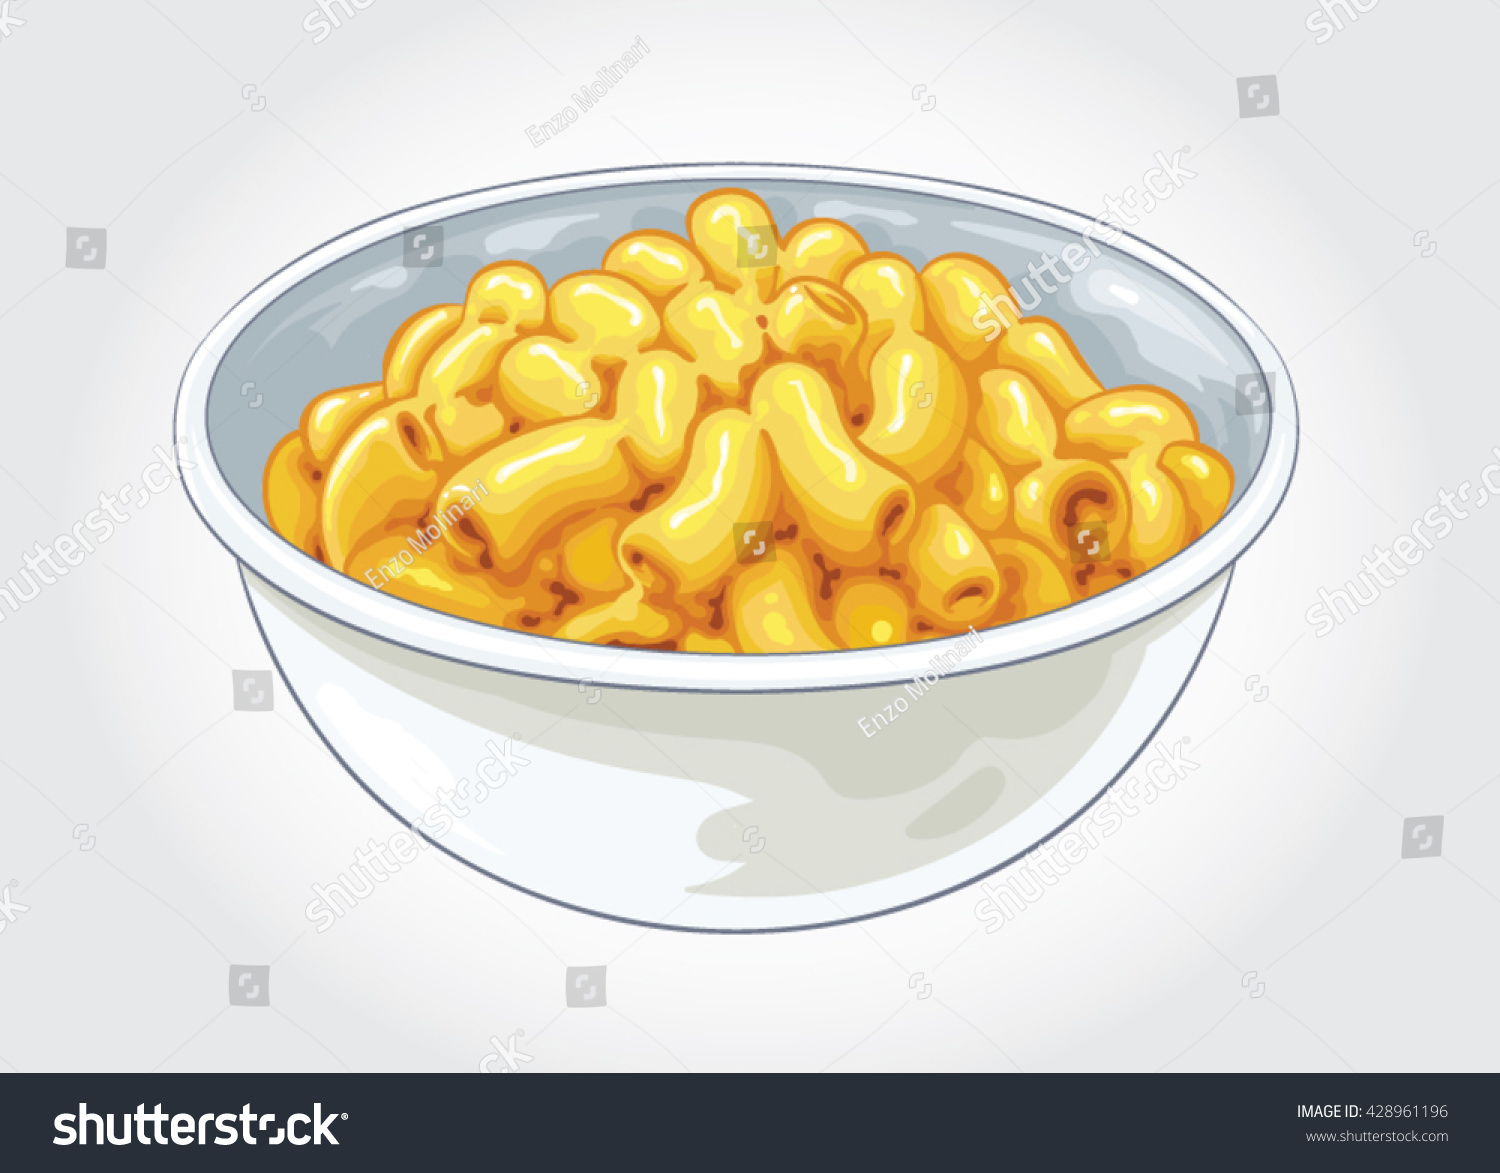 Mac'n'cheese Stock Illustrations, Images & Vectors Shutterstock